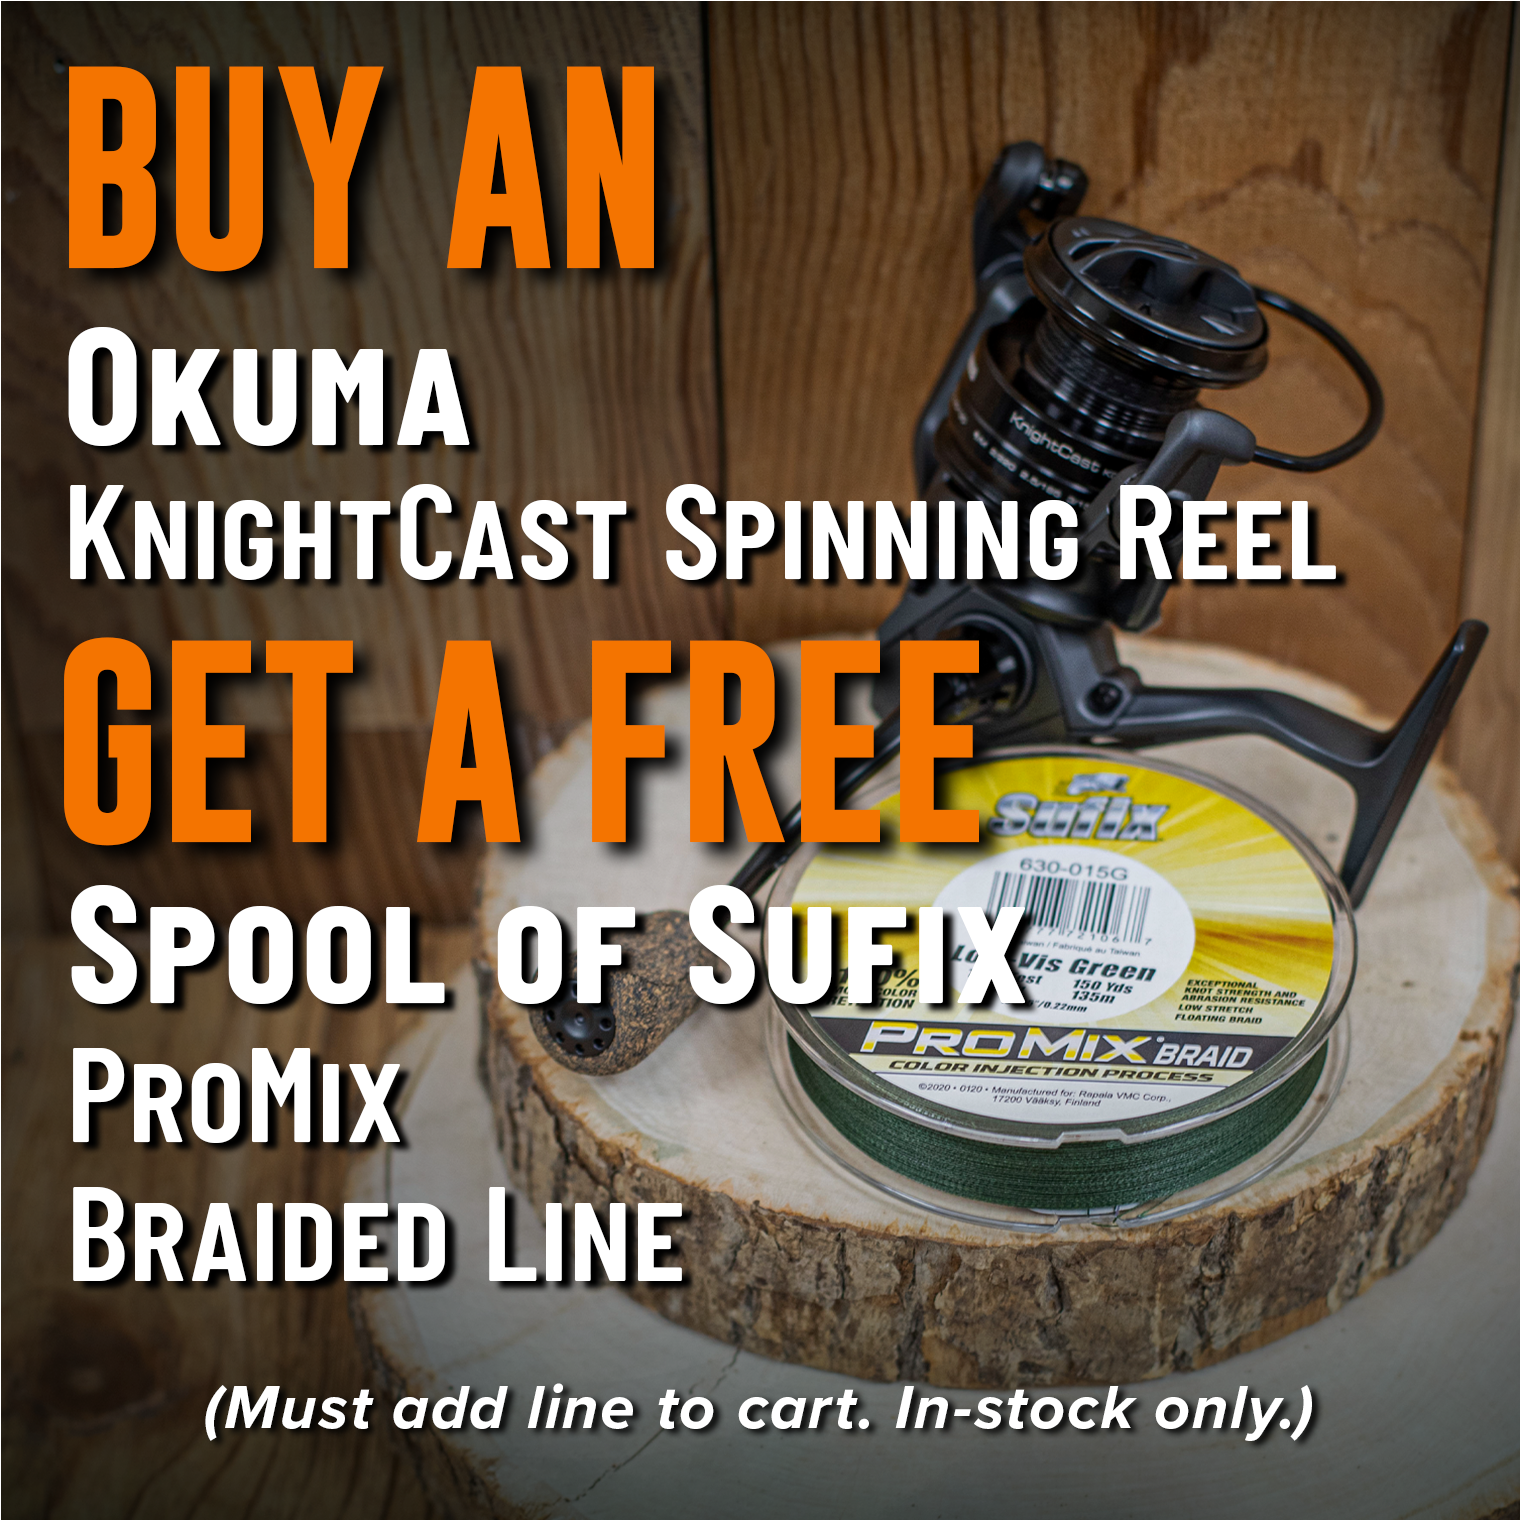 Buy An Okuma KnightCast Spinning Reel Get a Free Spool of Sufix ProMix Braided Line (Must add line to cart. In-stock only.)